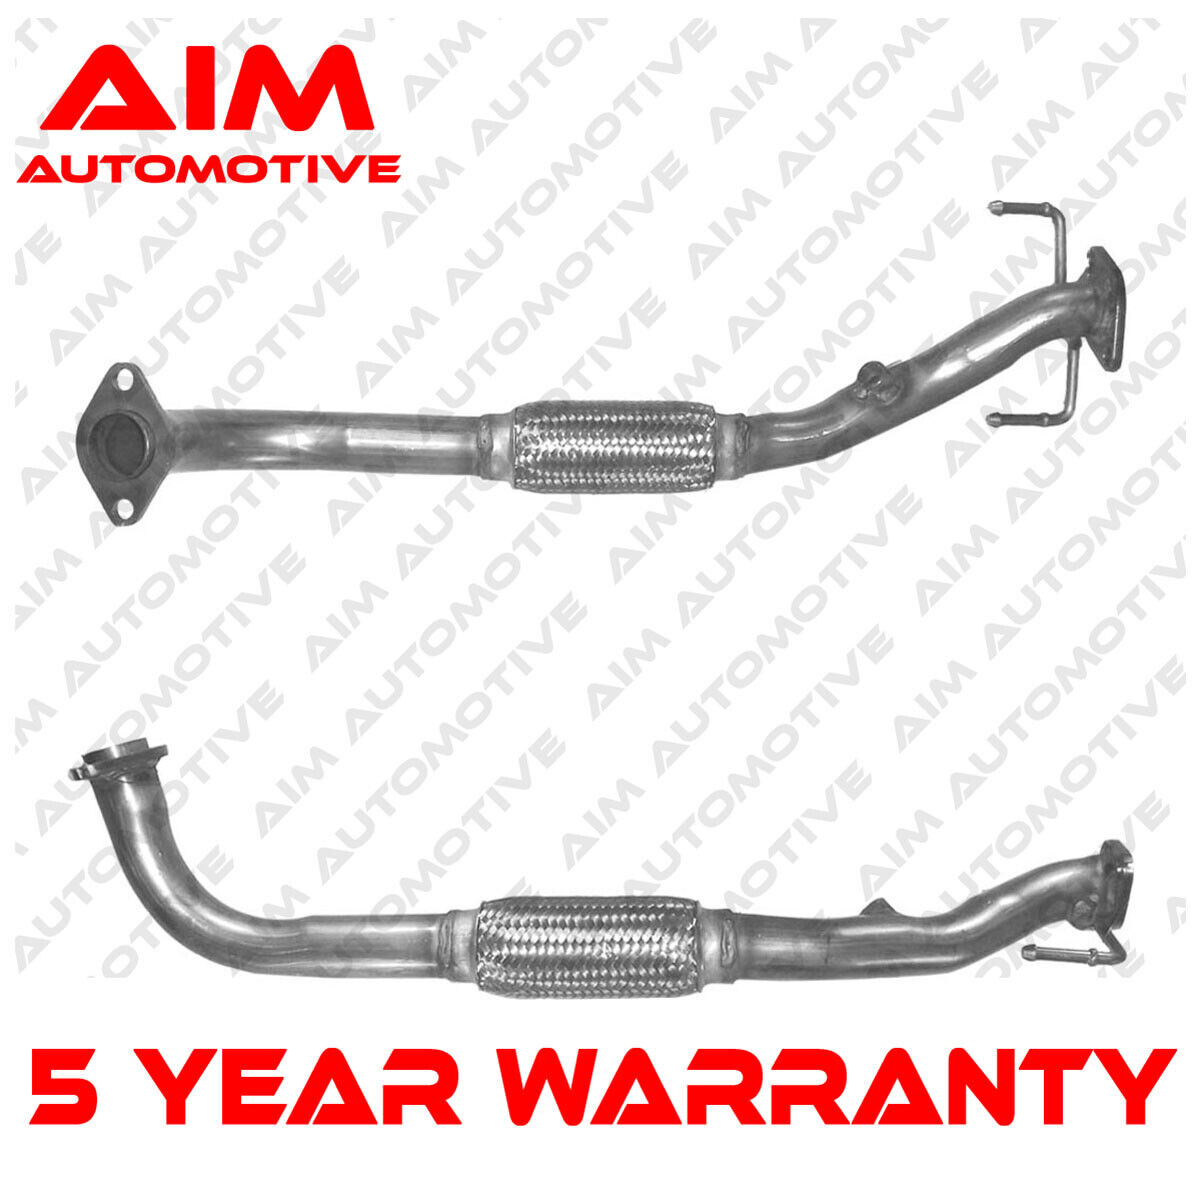 Exhaust Pipe Euro 2 Front Aim Fits Proton Satria 1996-2000 1.6 + Other Models